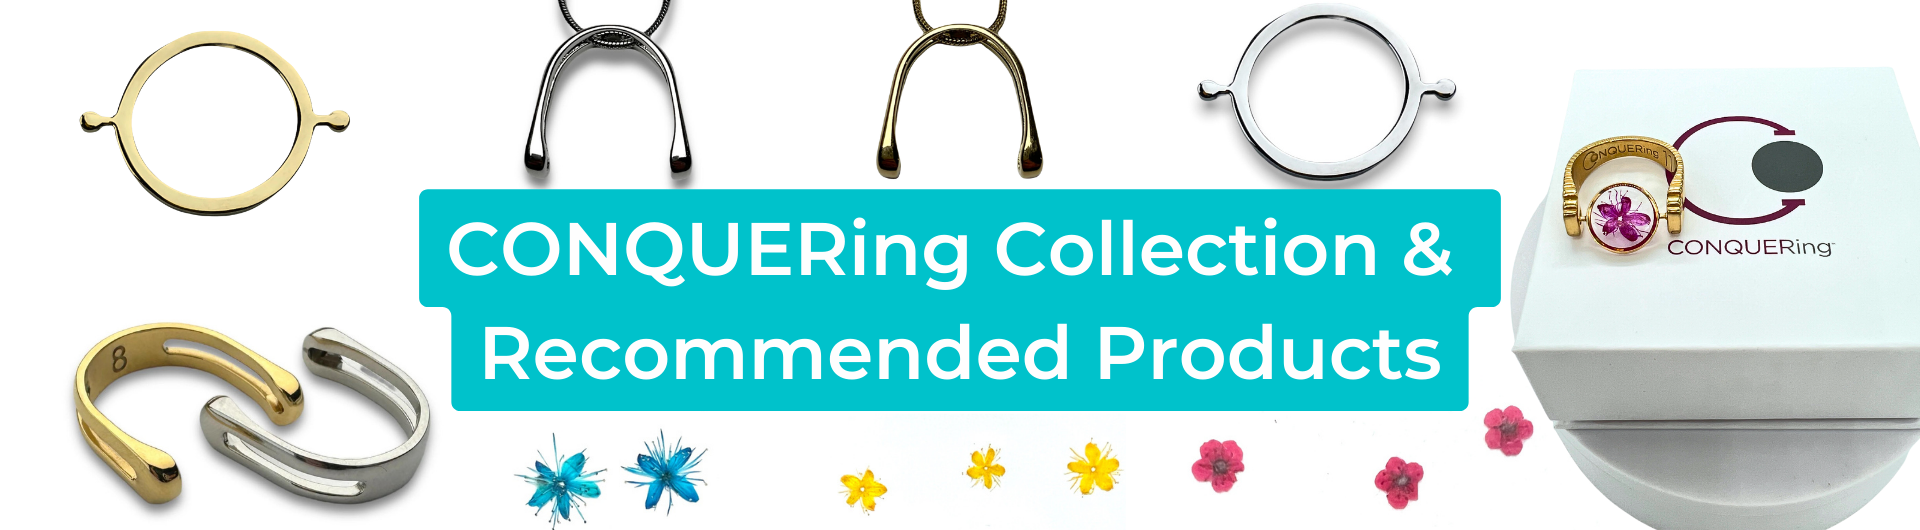 CONQUERing Collection & Recommended Products